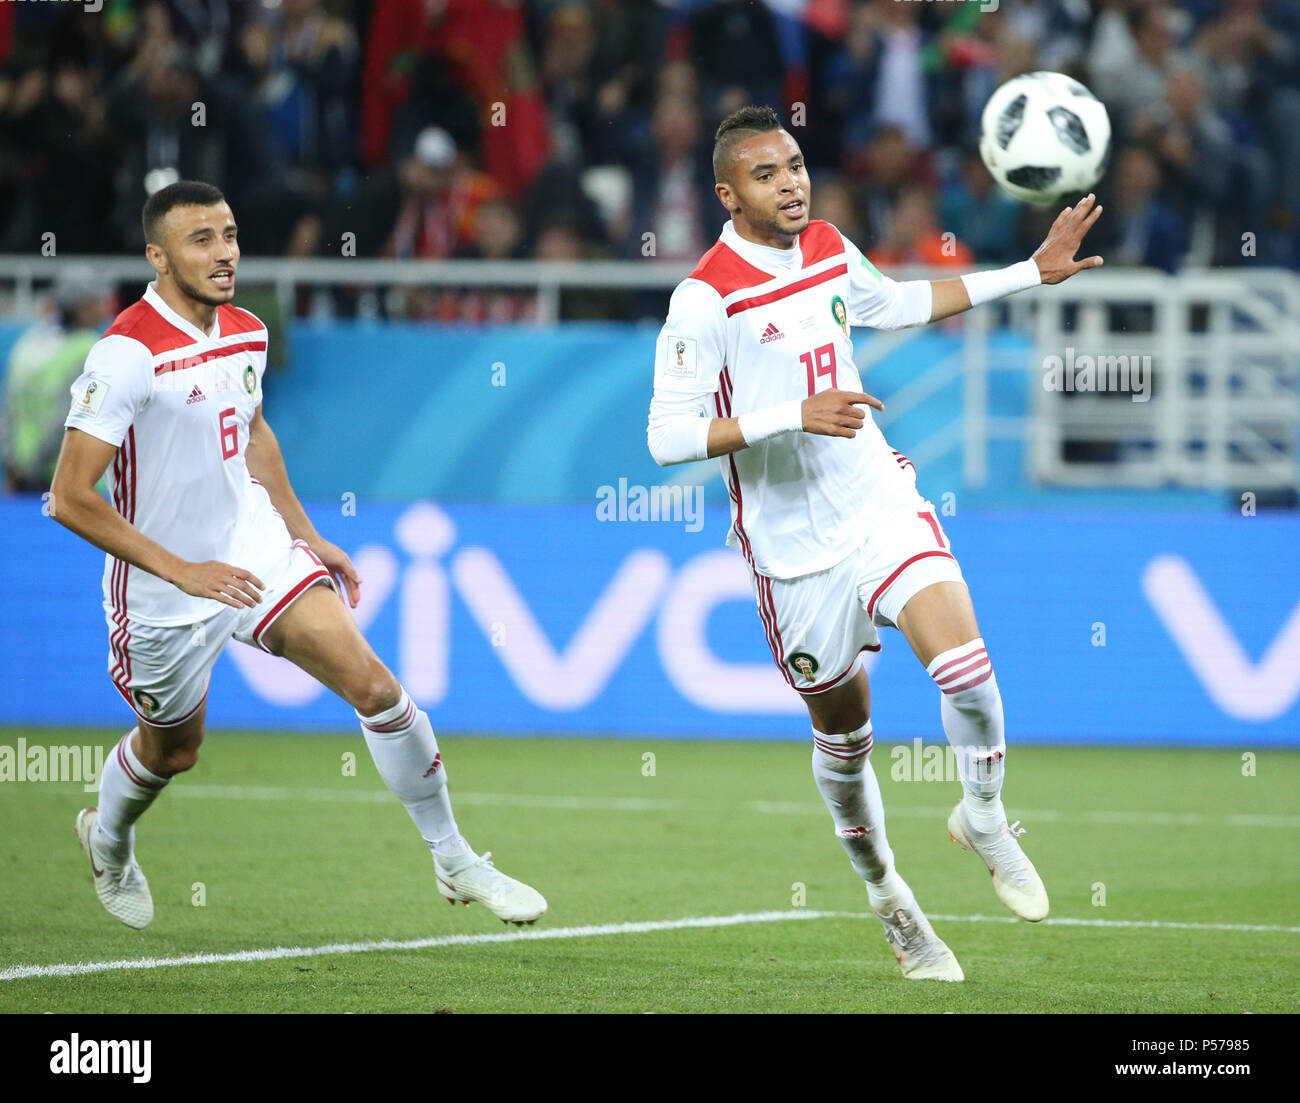 Kaliningrad, Russia. 25th June, 2018. Youssef En Nesyri (R) of Morocco celebrates scoring during the 2018 FIFA World Cup Group B match between Spain and Morocco in Kaliningrad, Russia, June 25, 2018. Credit: Li Ming/Xinhua/Alamy Live News Stock Photo